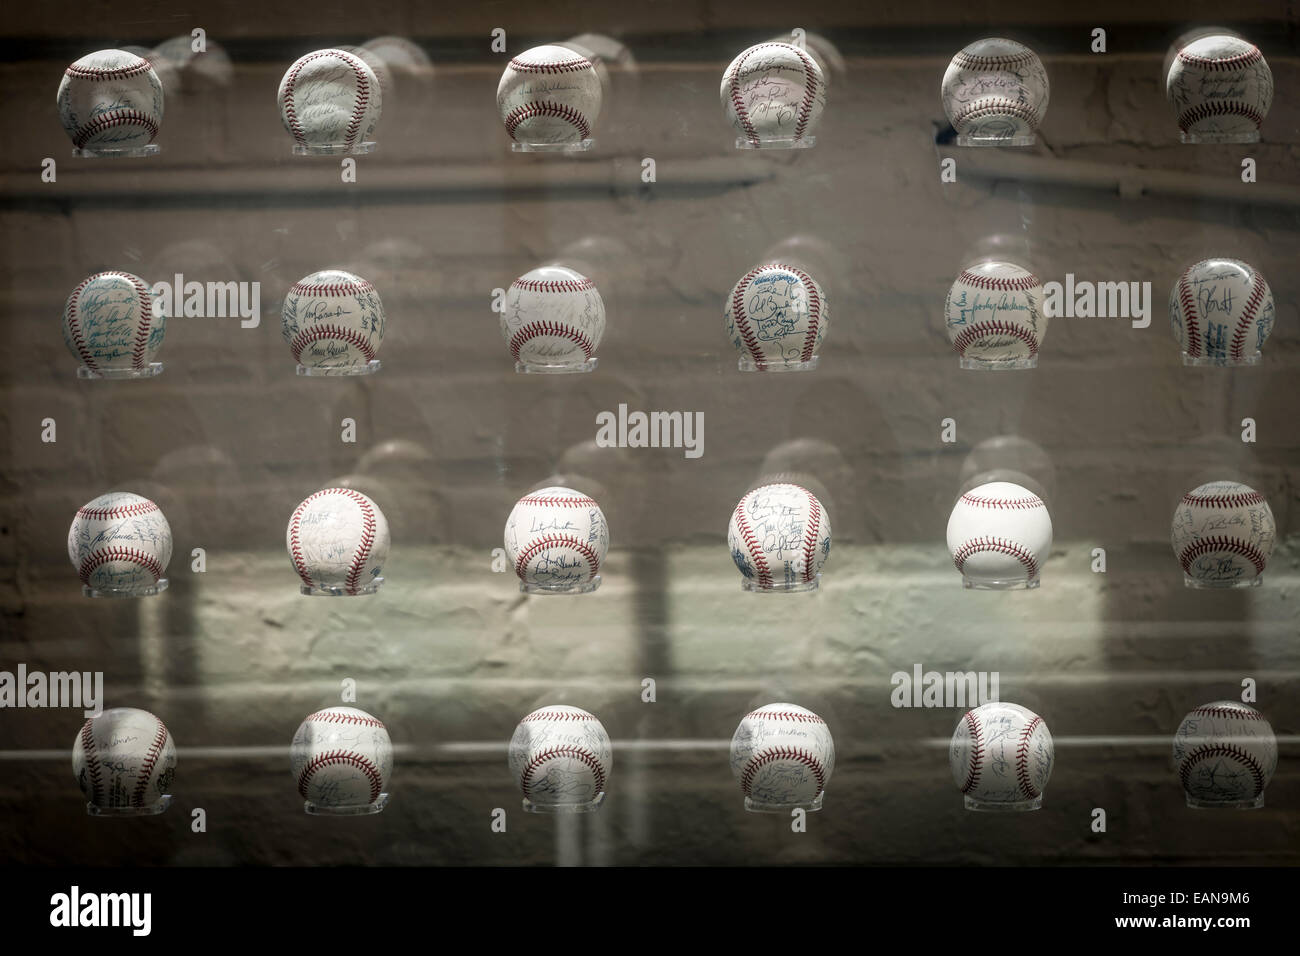 A showcase containing baseballs signed by some of  the sports greatest stars on display at Fenway Park, home to the Boston Red S Stock Photo